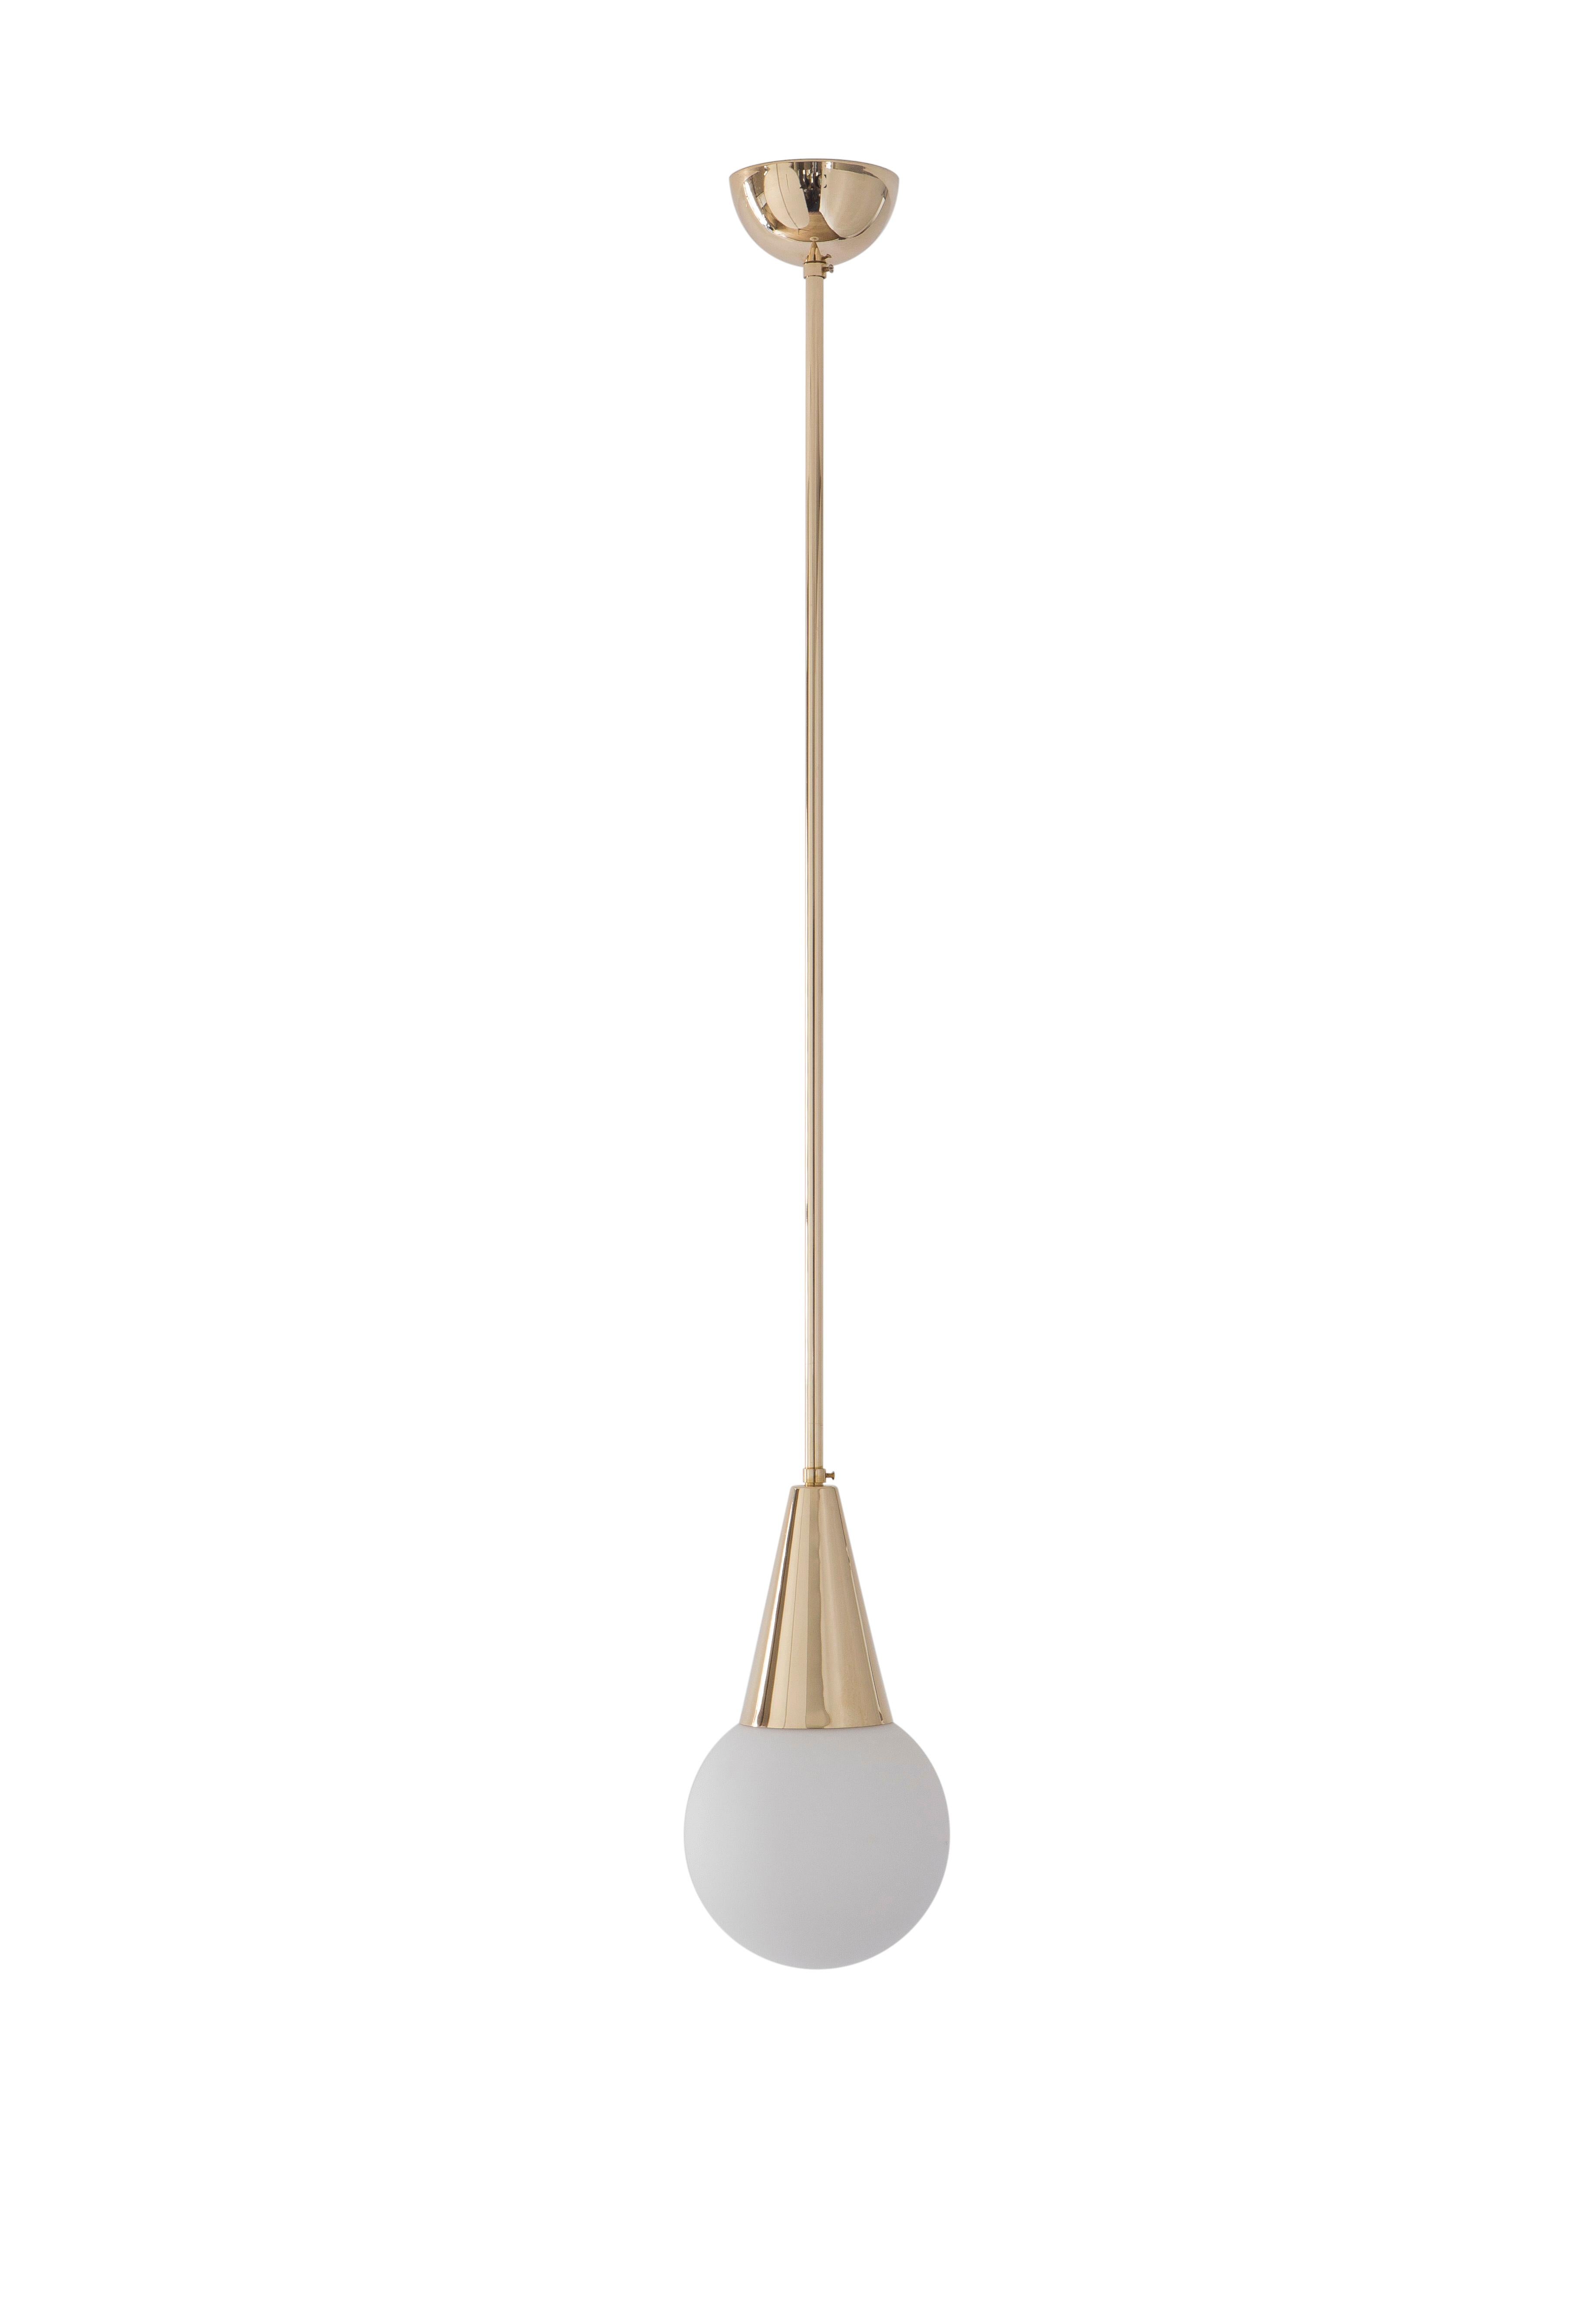 Pendant 05 by Magic Circus Editions
Dimensions: D 25 x W 25 x H 150 cm, also available in H 110, 130, 150, 175, 190 cm
Materials: Brass, mouth blown glass

All our lamps can be wired according to each country. If sold to the USA it will be wired